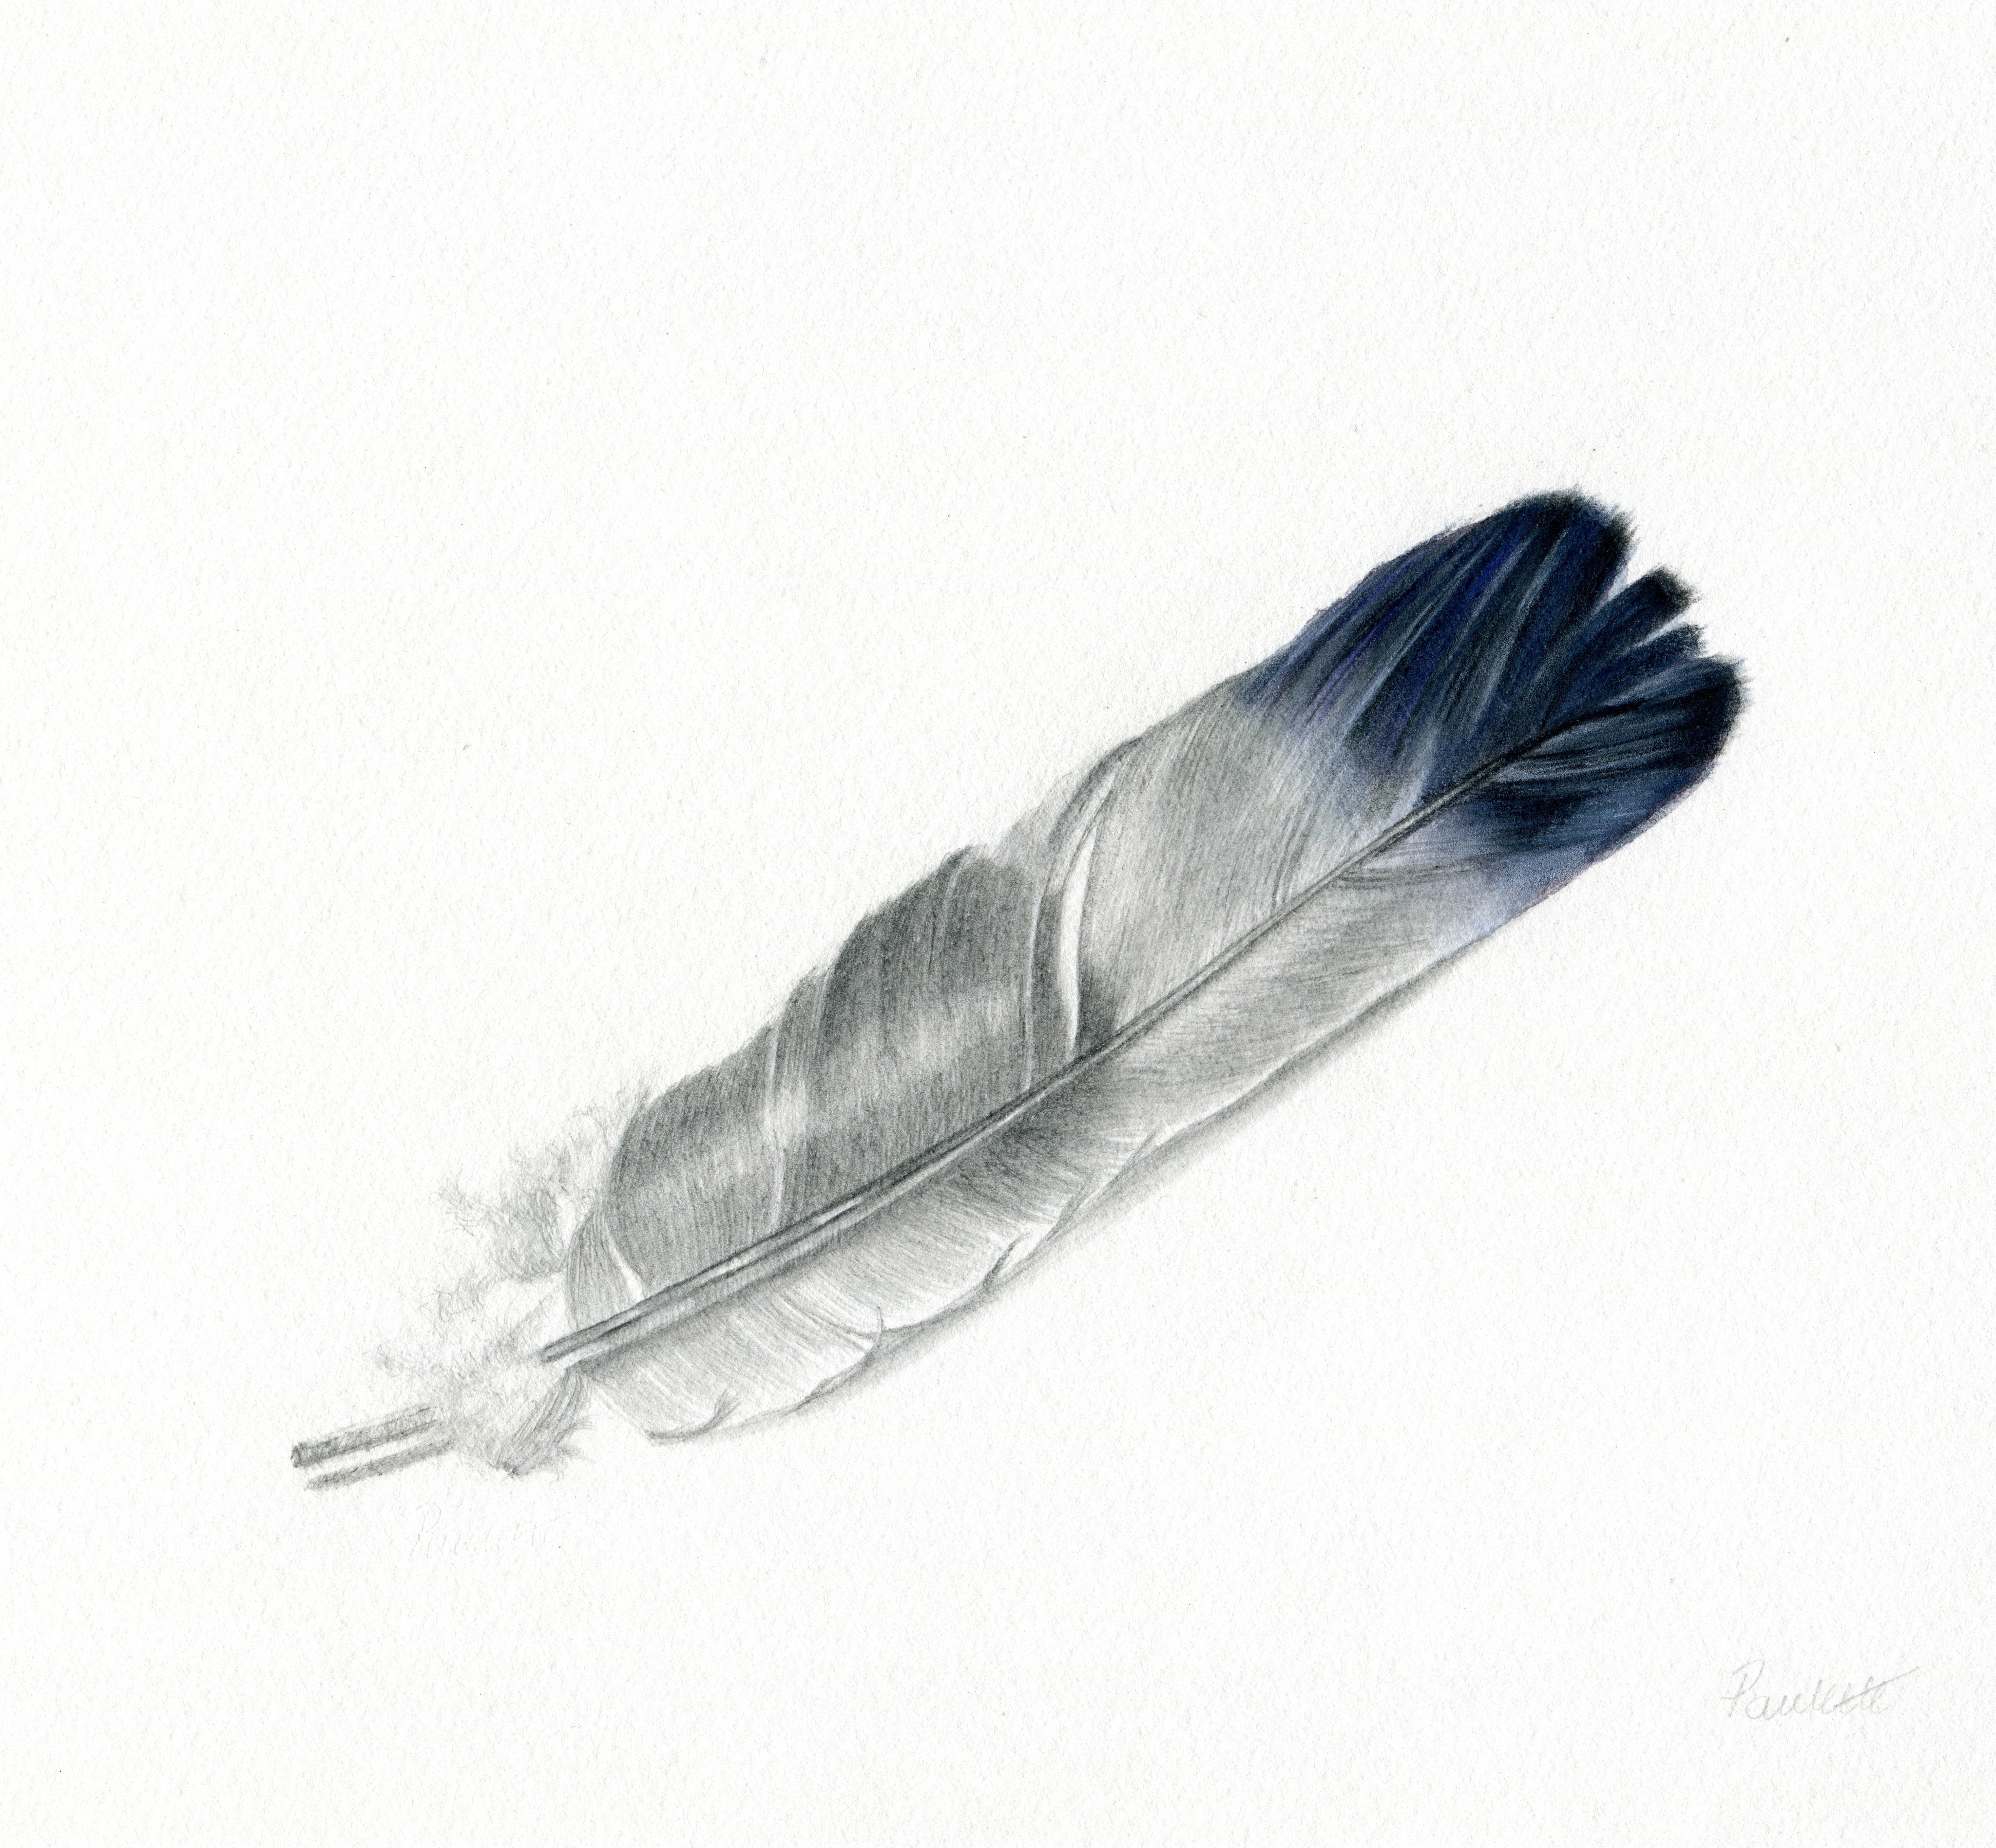 original mixed media drawing of a magpie's feather